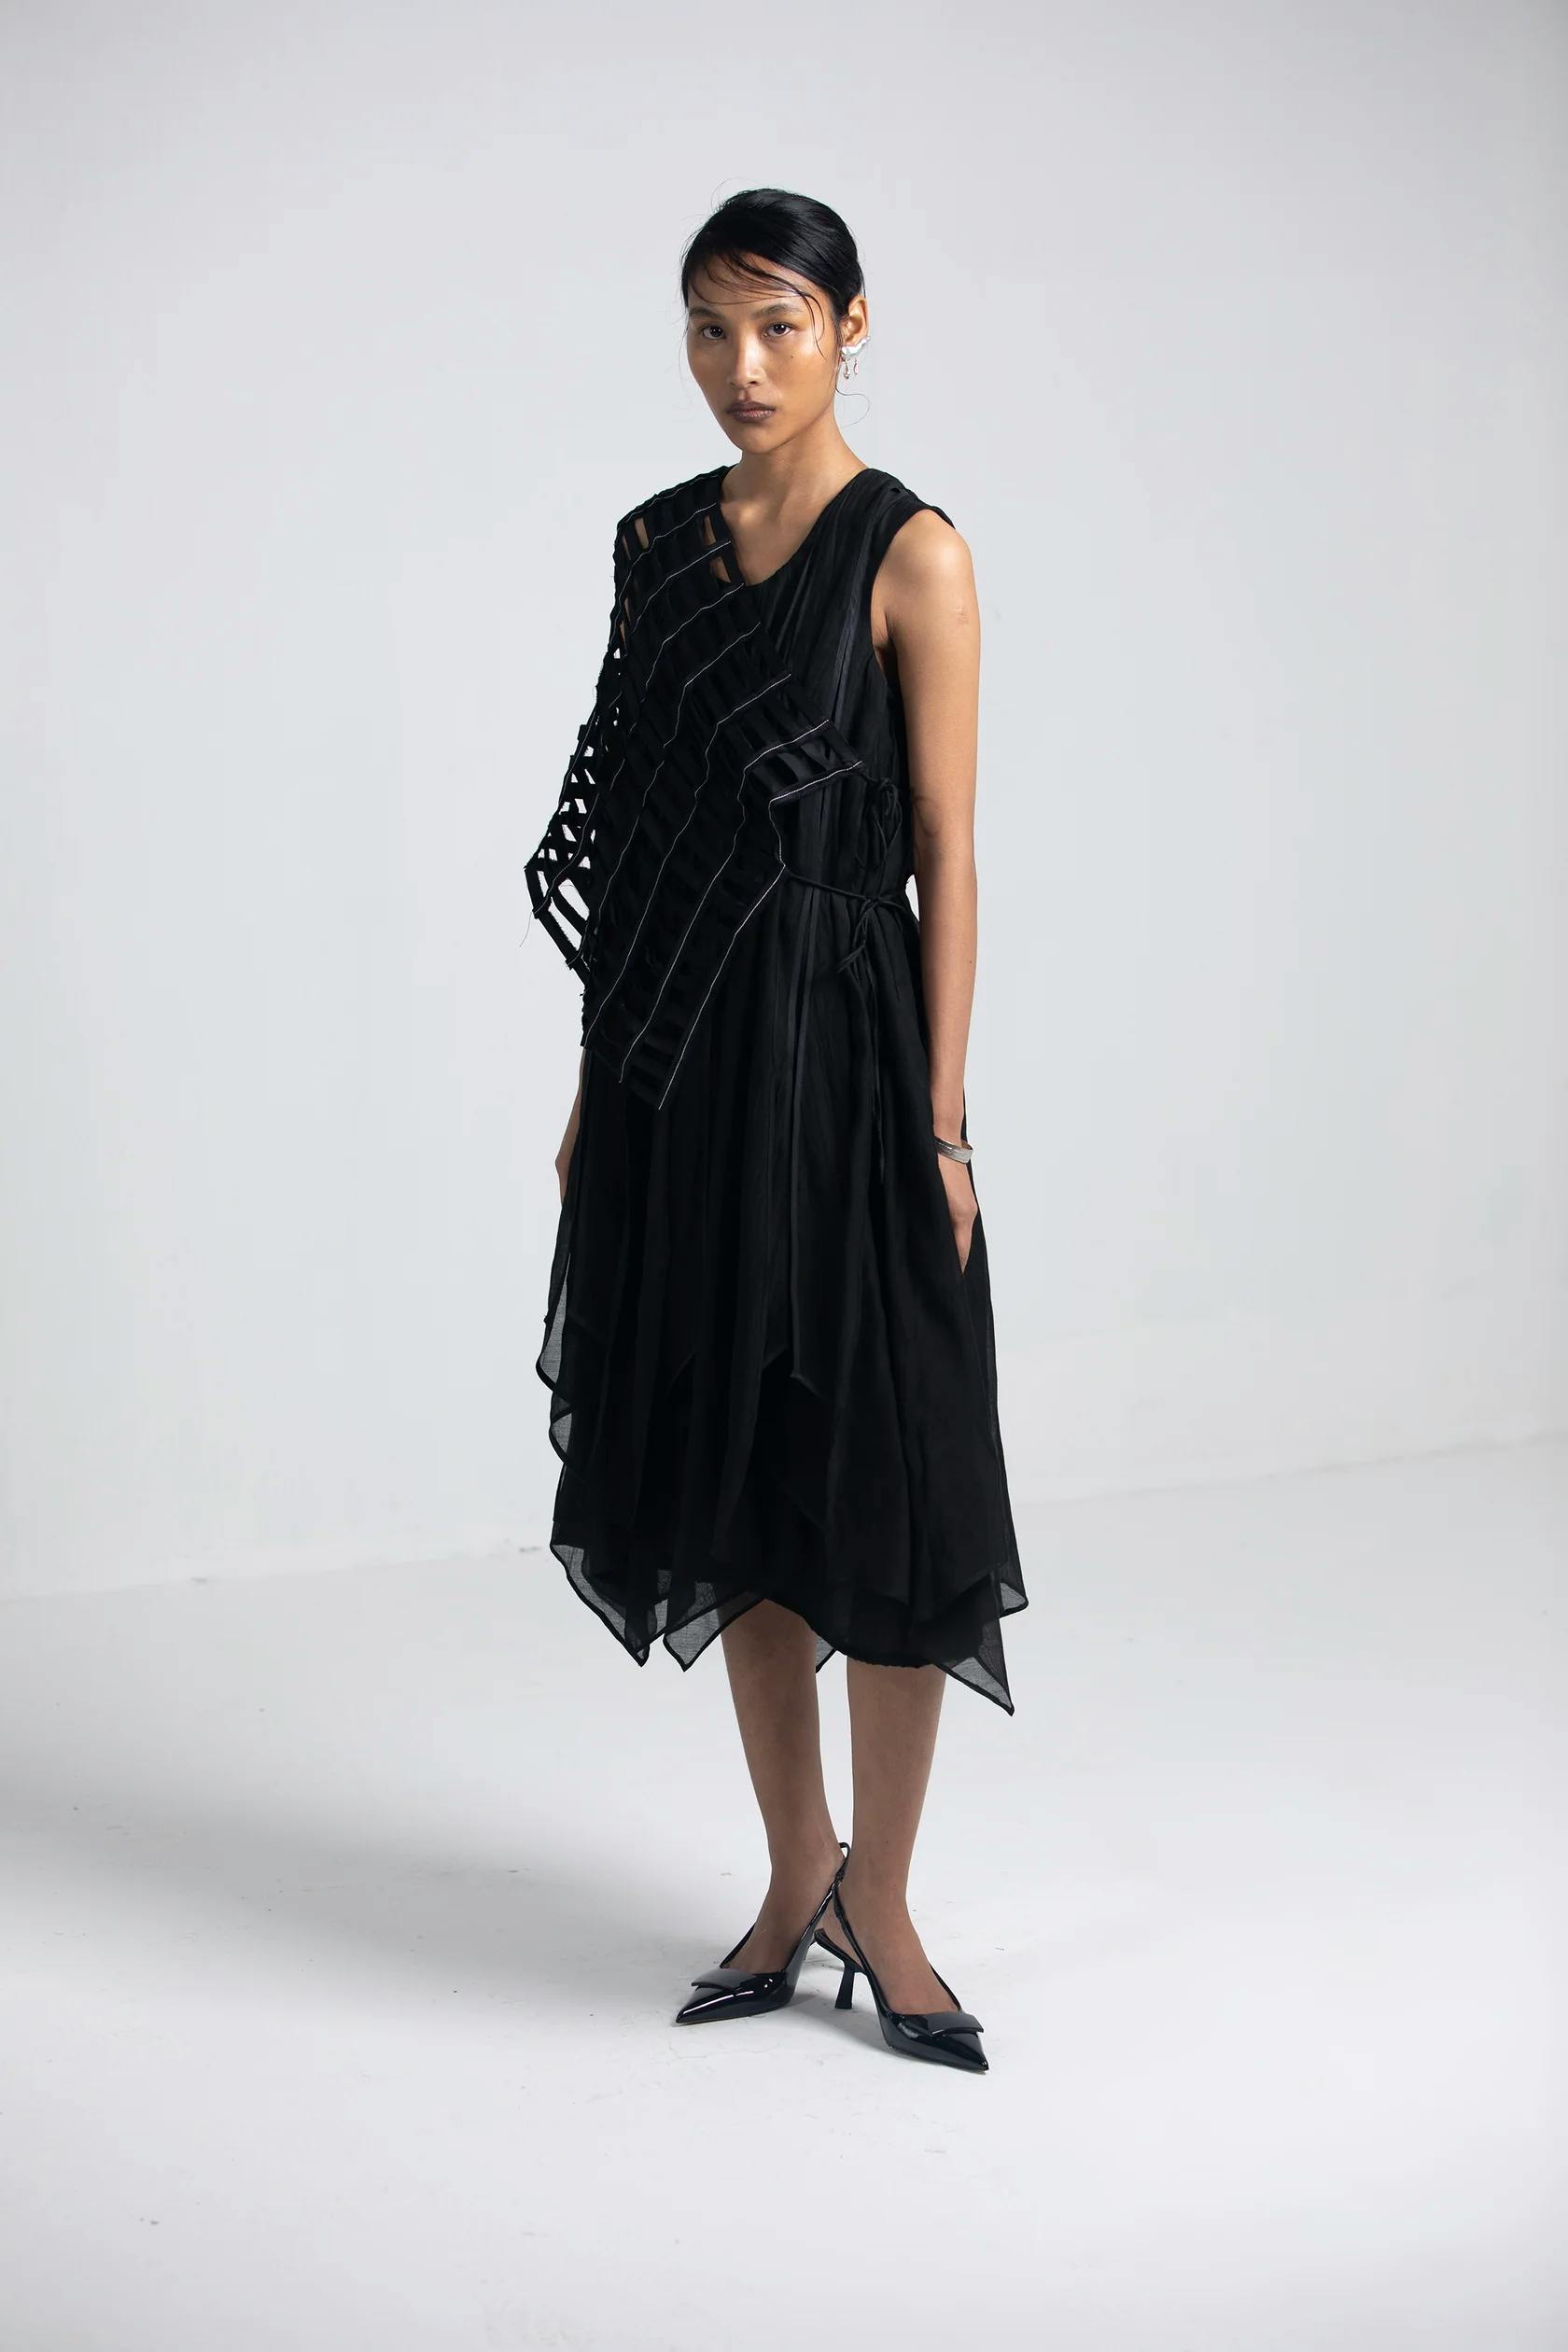 Mystery Dress, a product by Corpora Studio